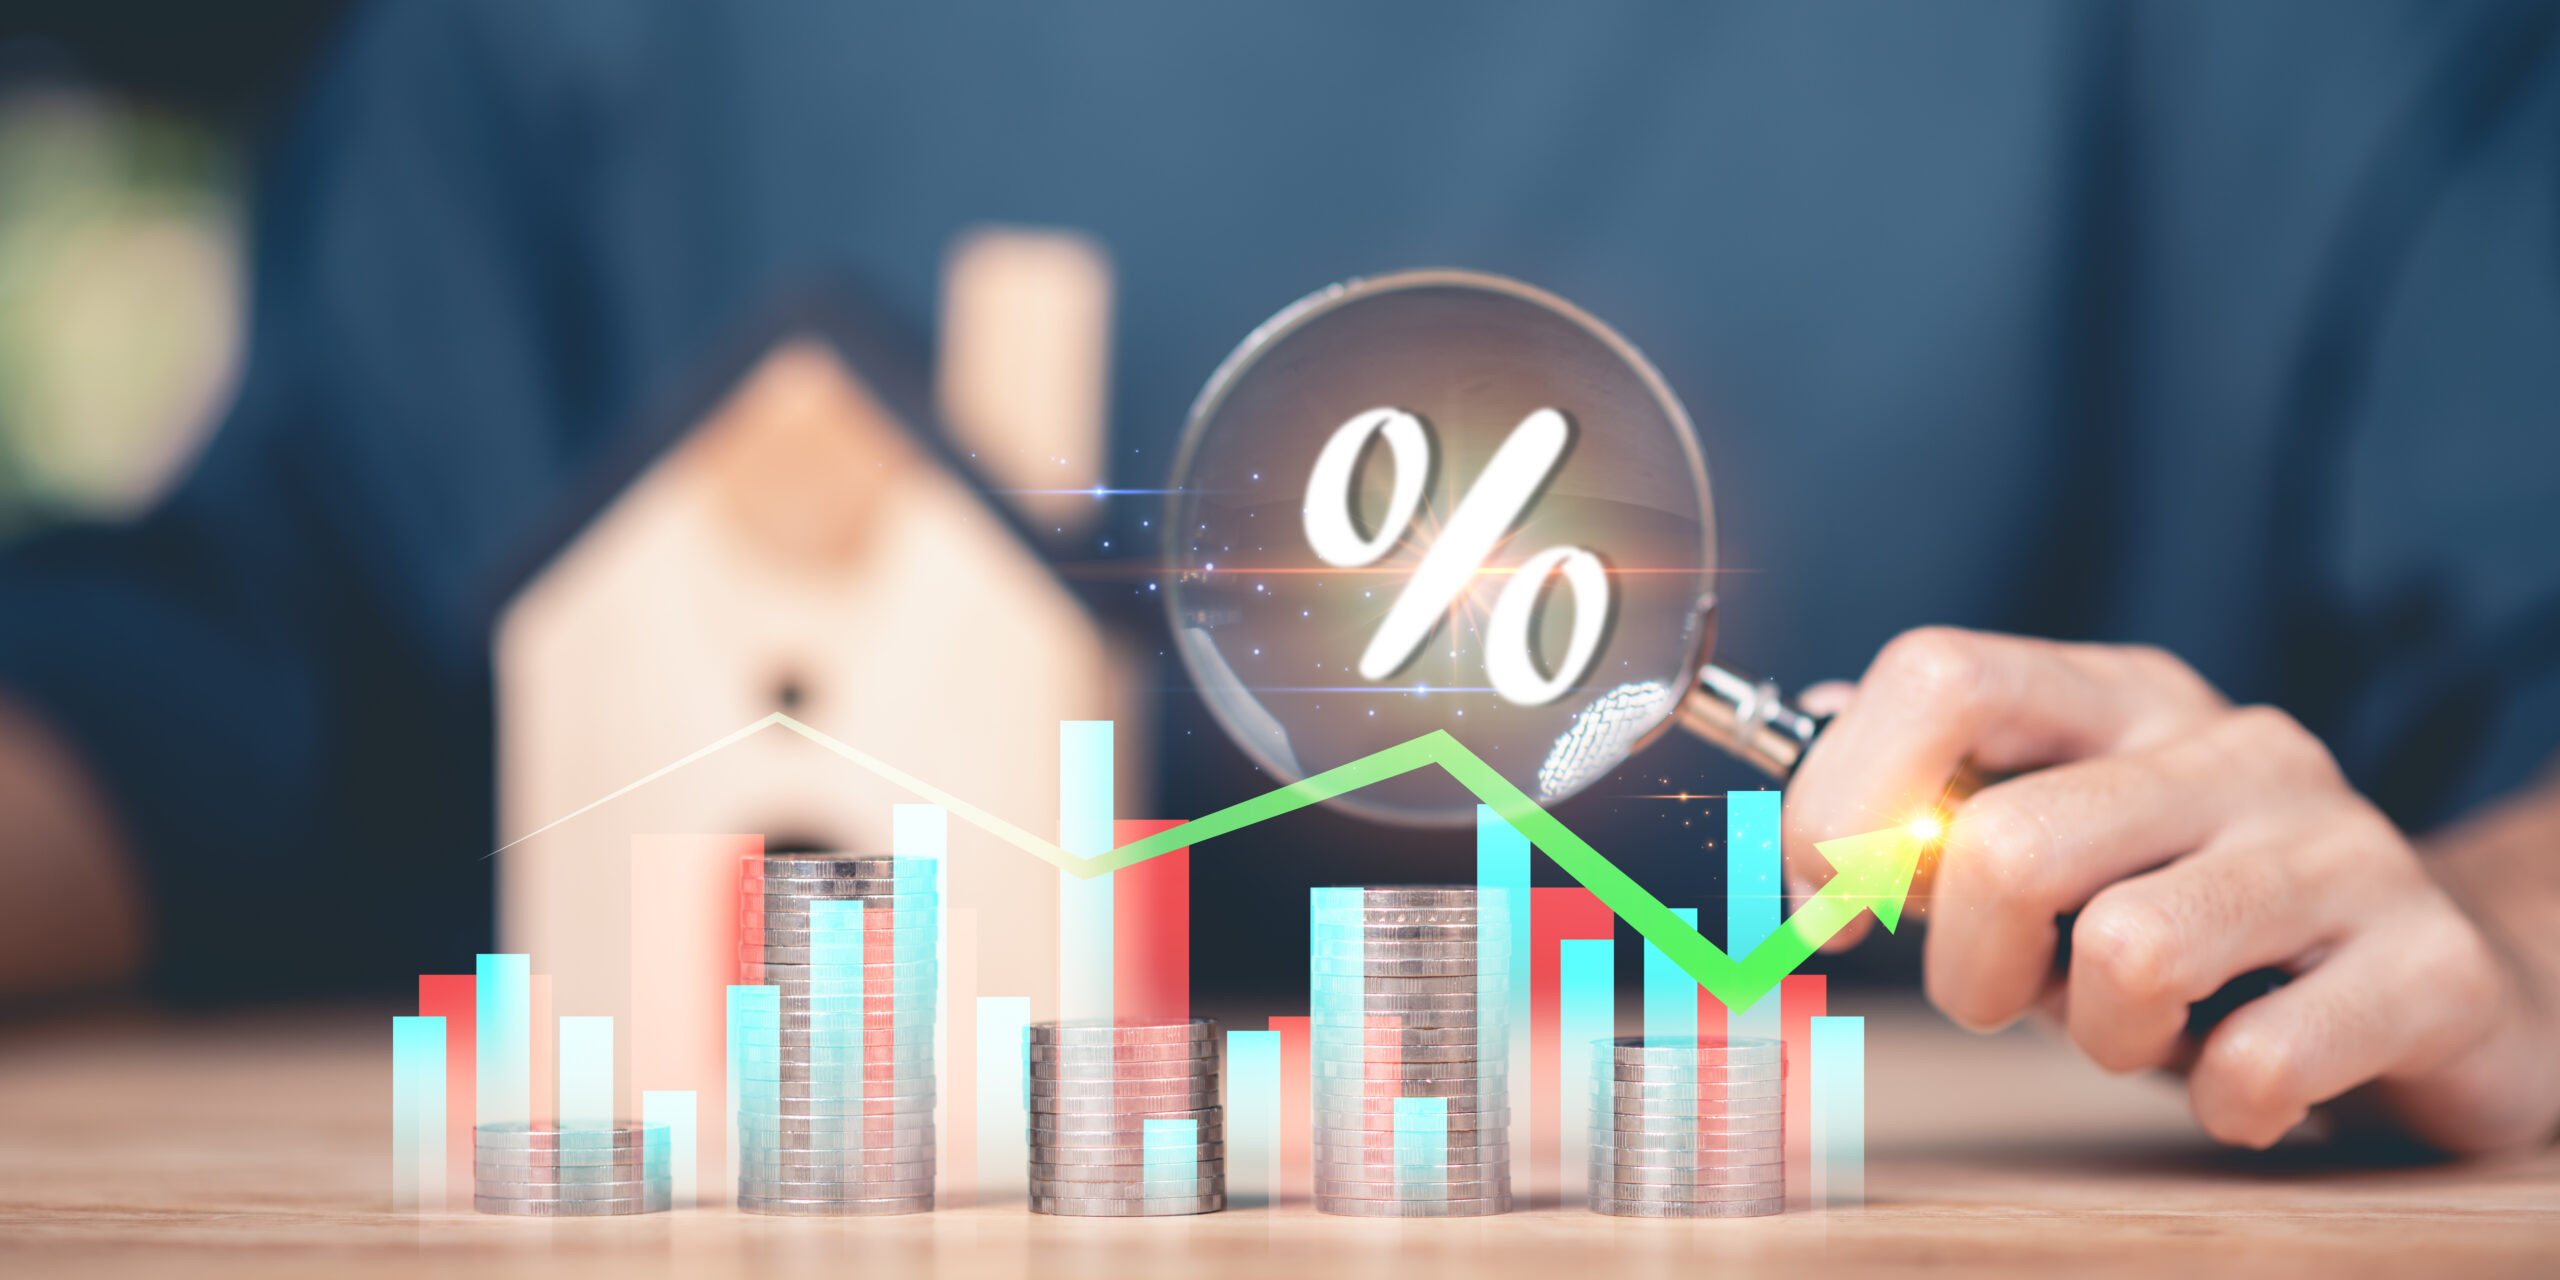 The Benefits of Choosing a Fixed-Rate Home Loan